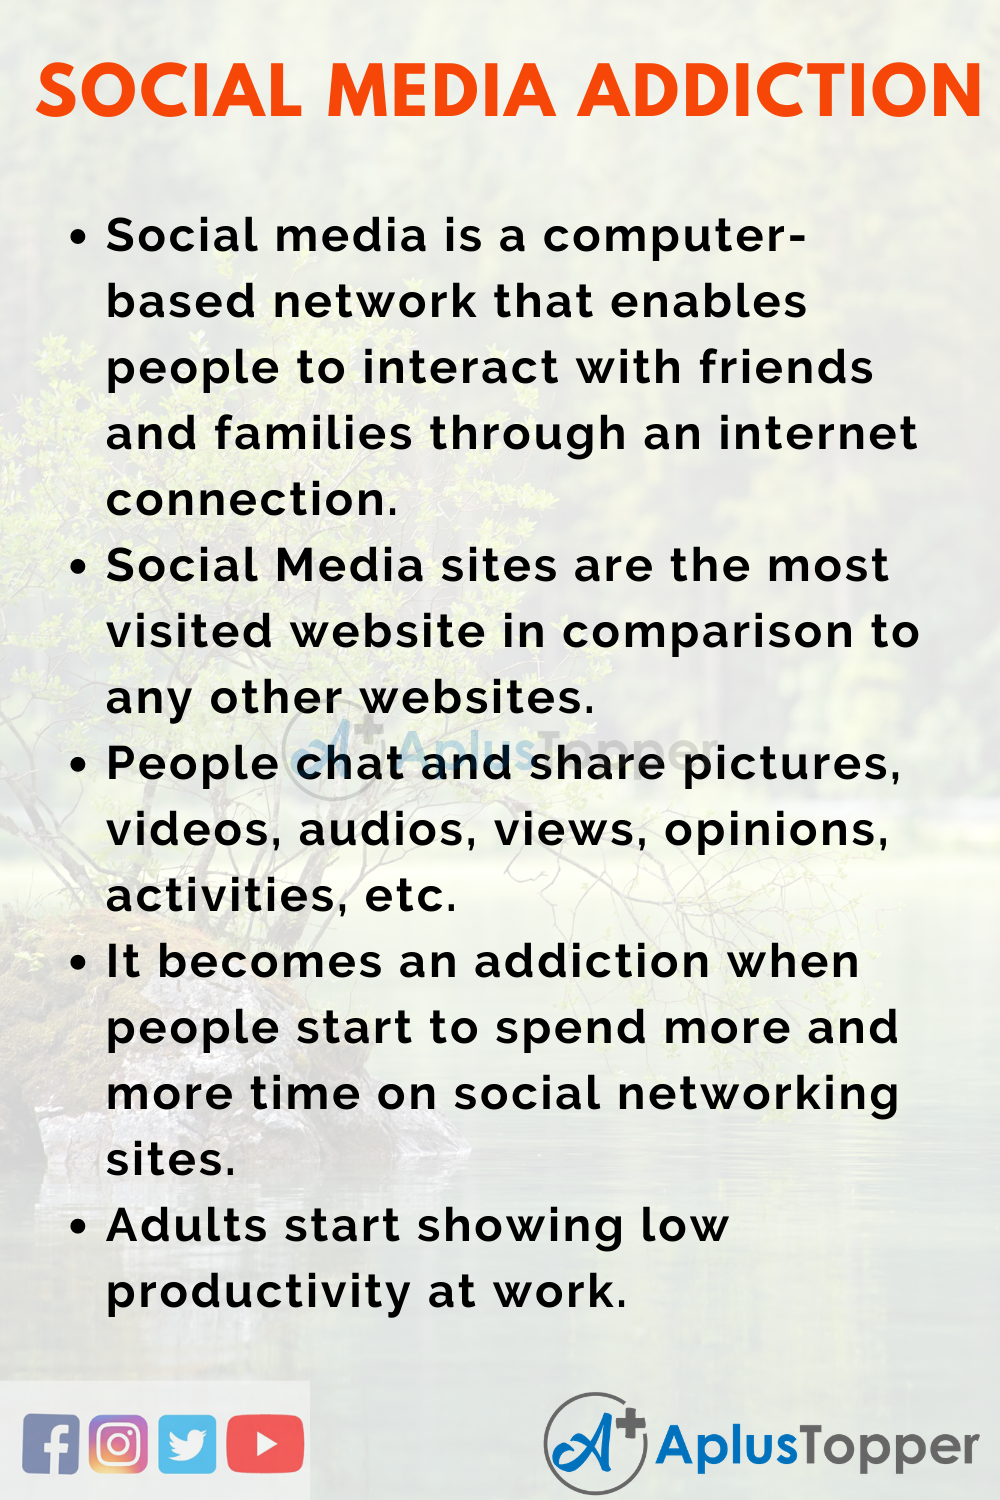 what are some examples of social networking sites